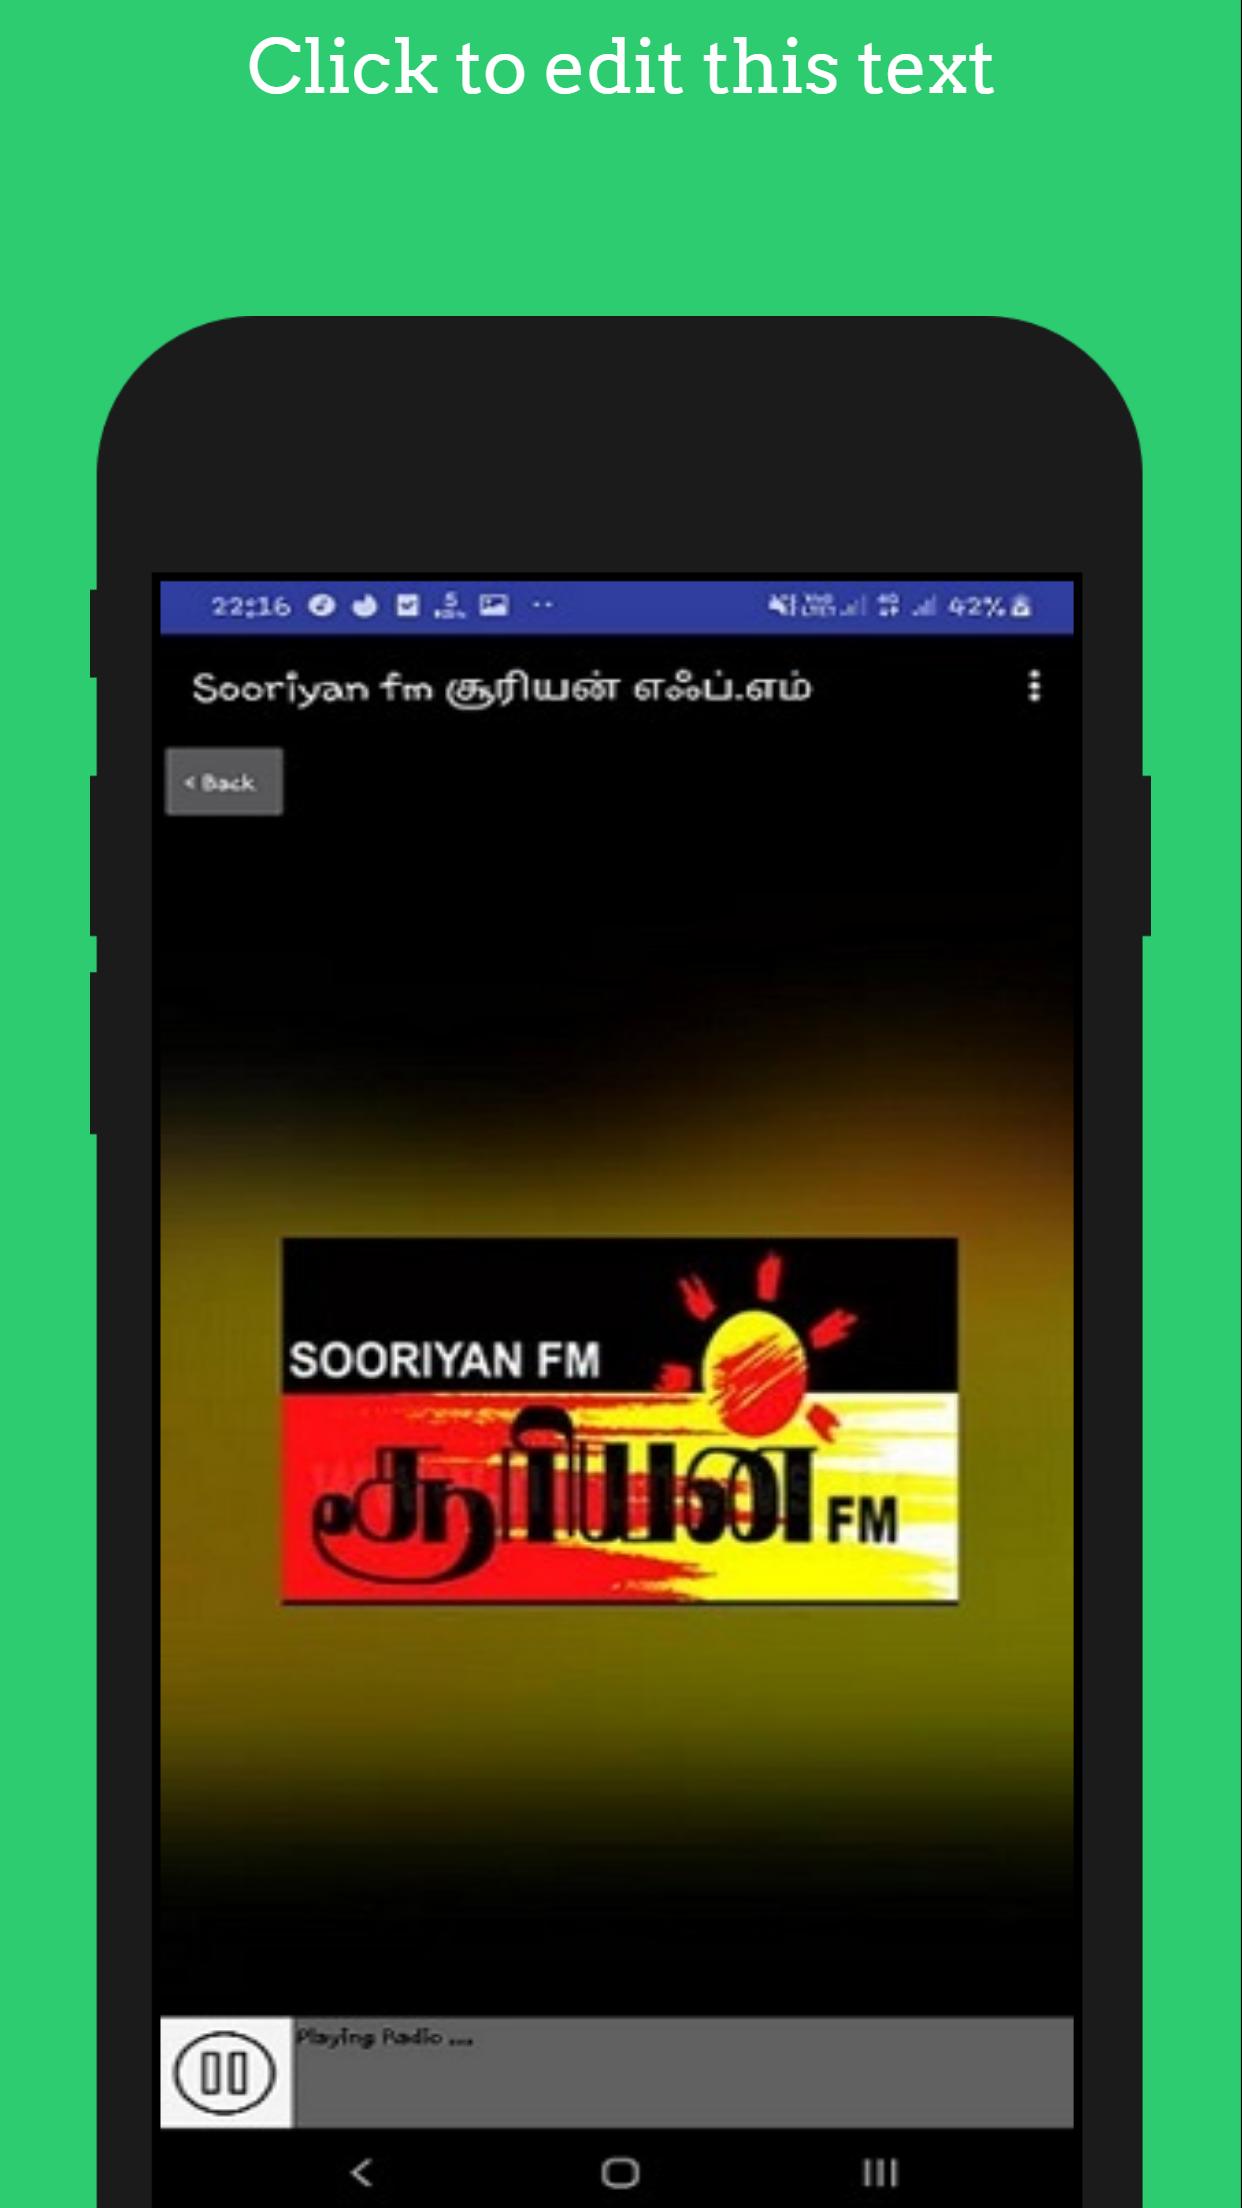 sooriyan fm for Android - APK Download